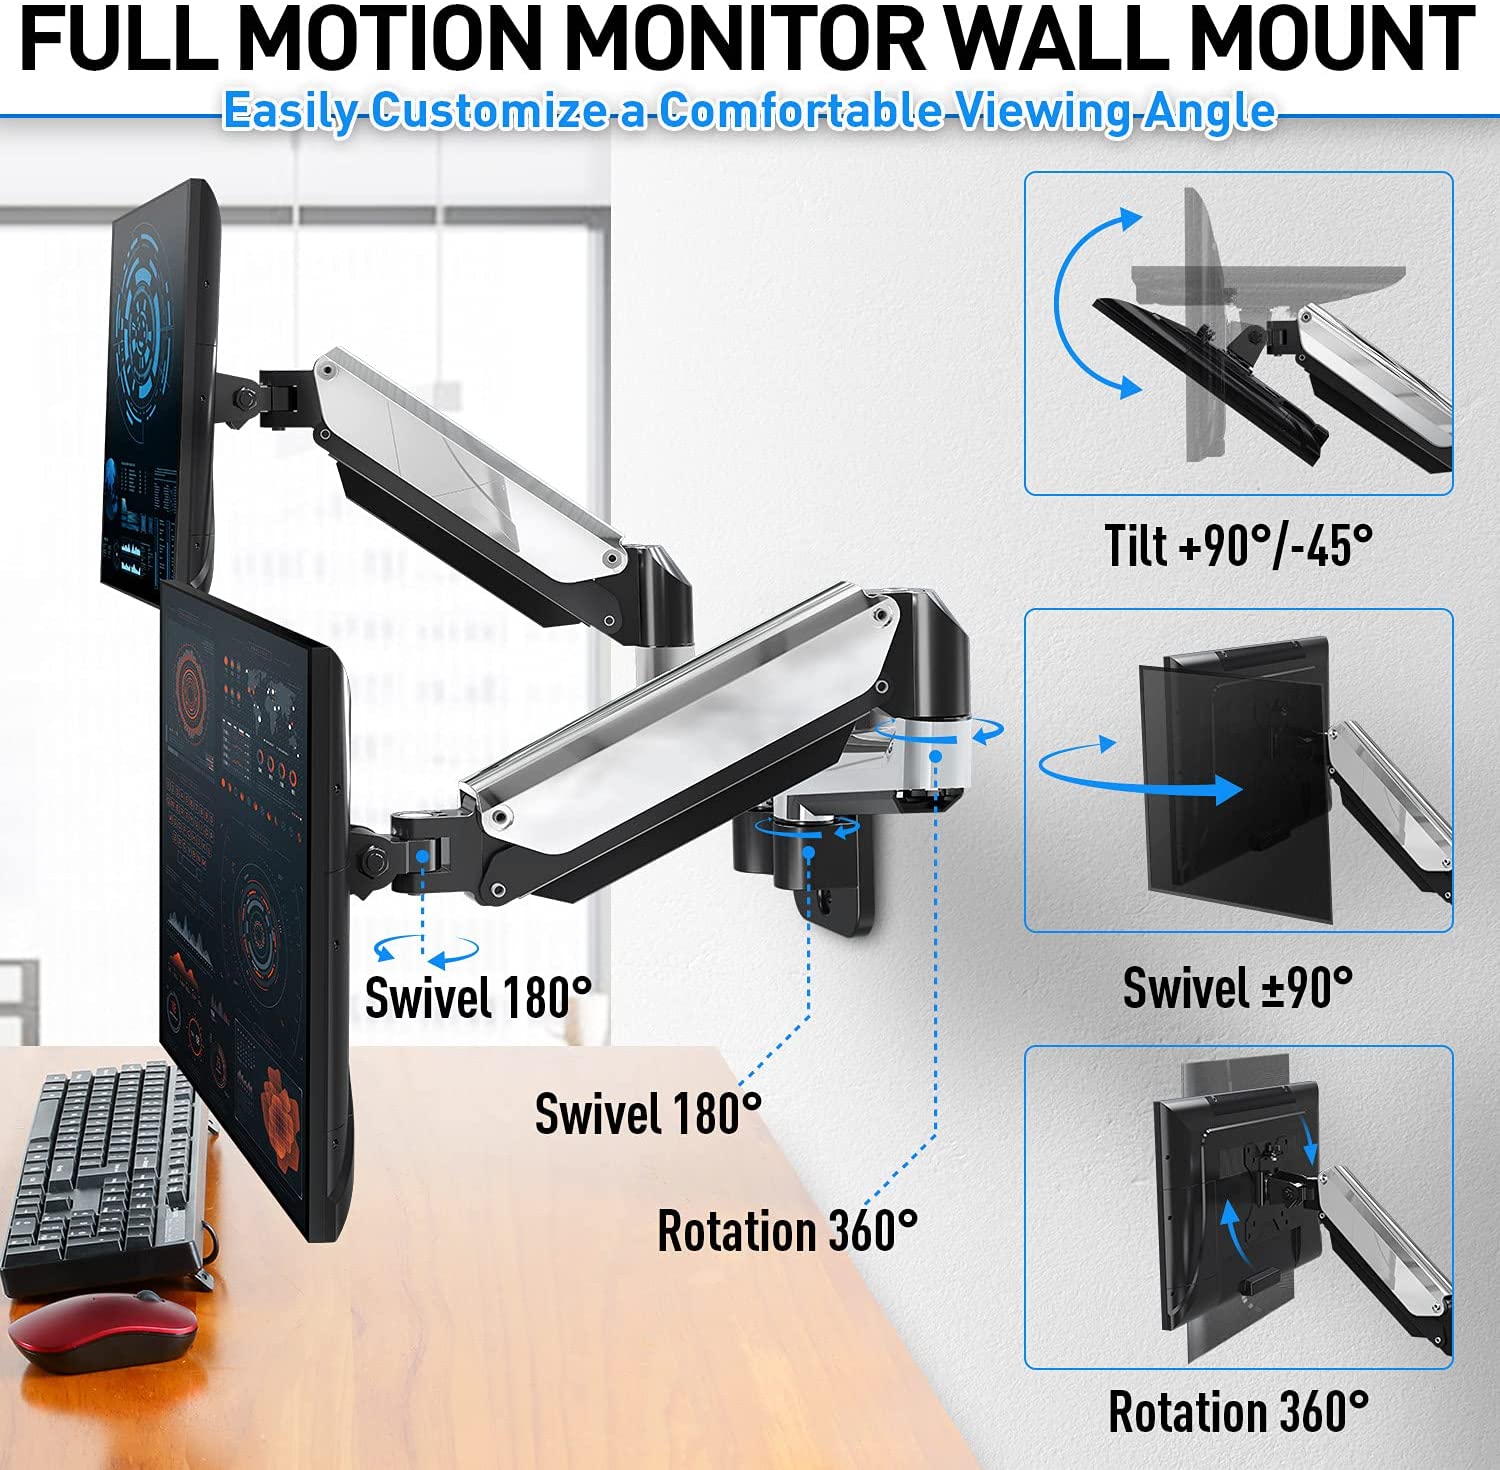 swivel, tiltable, and rotataing dual monitor wall mount